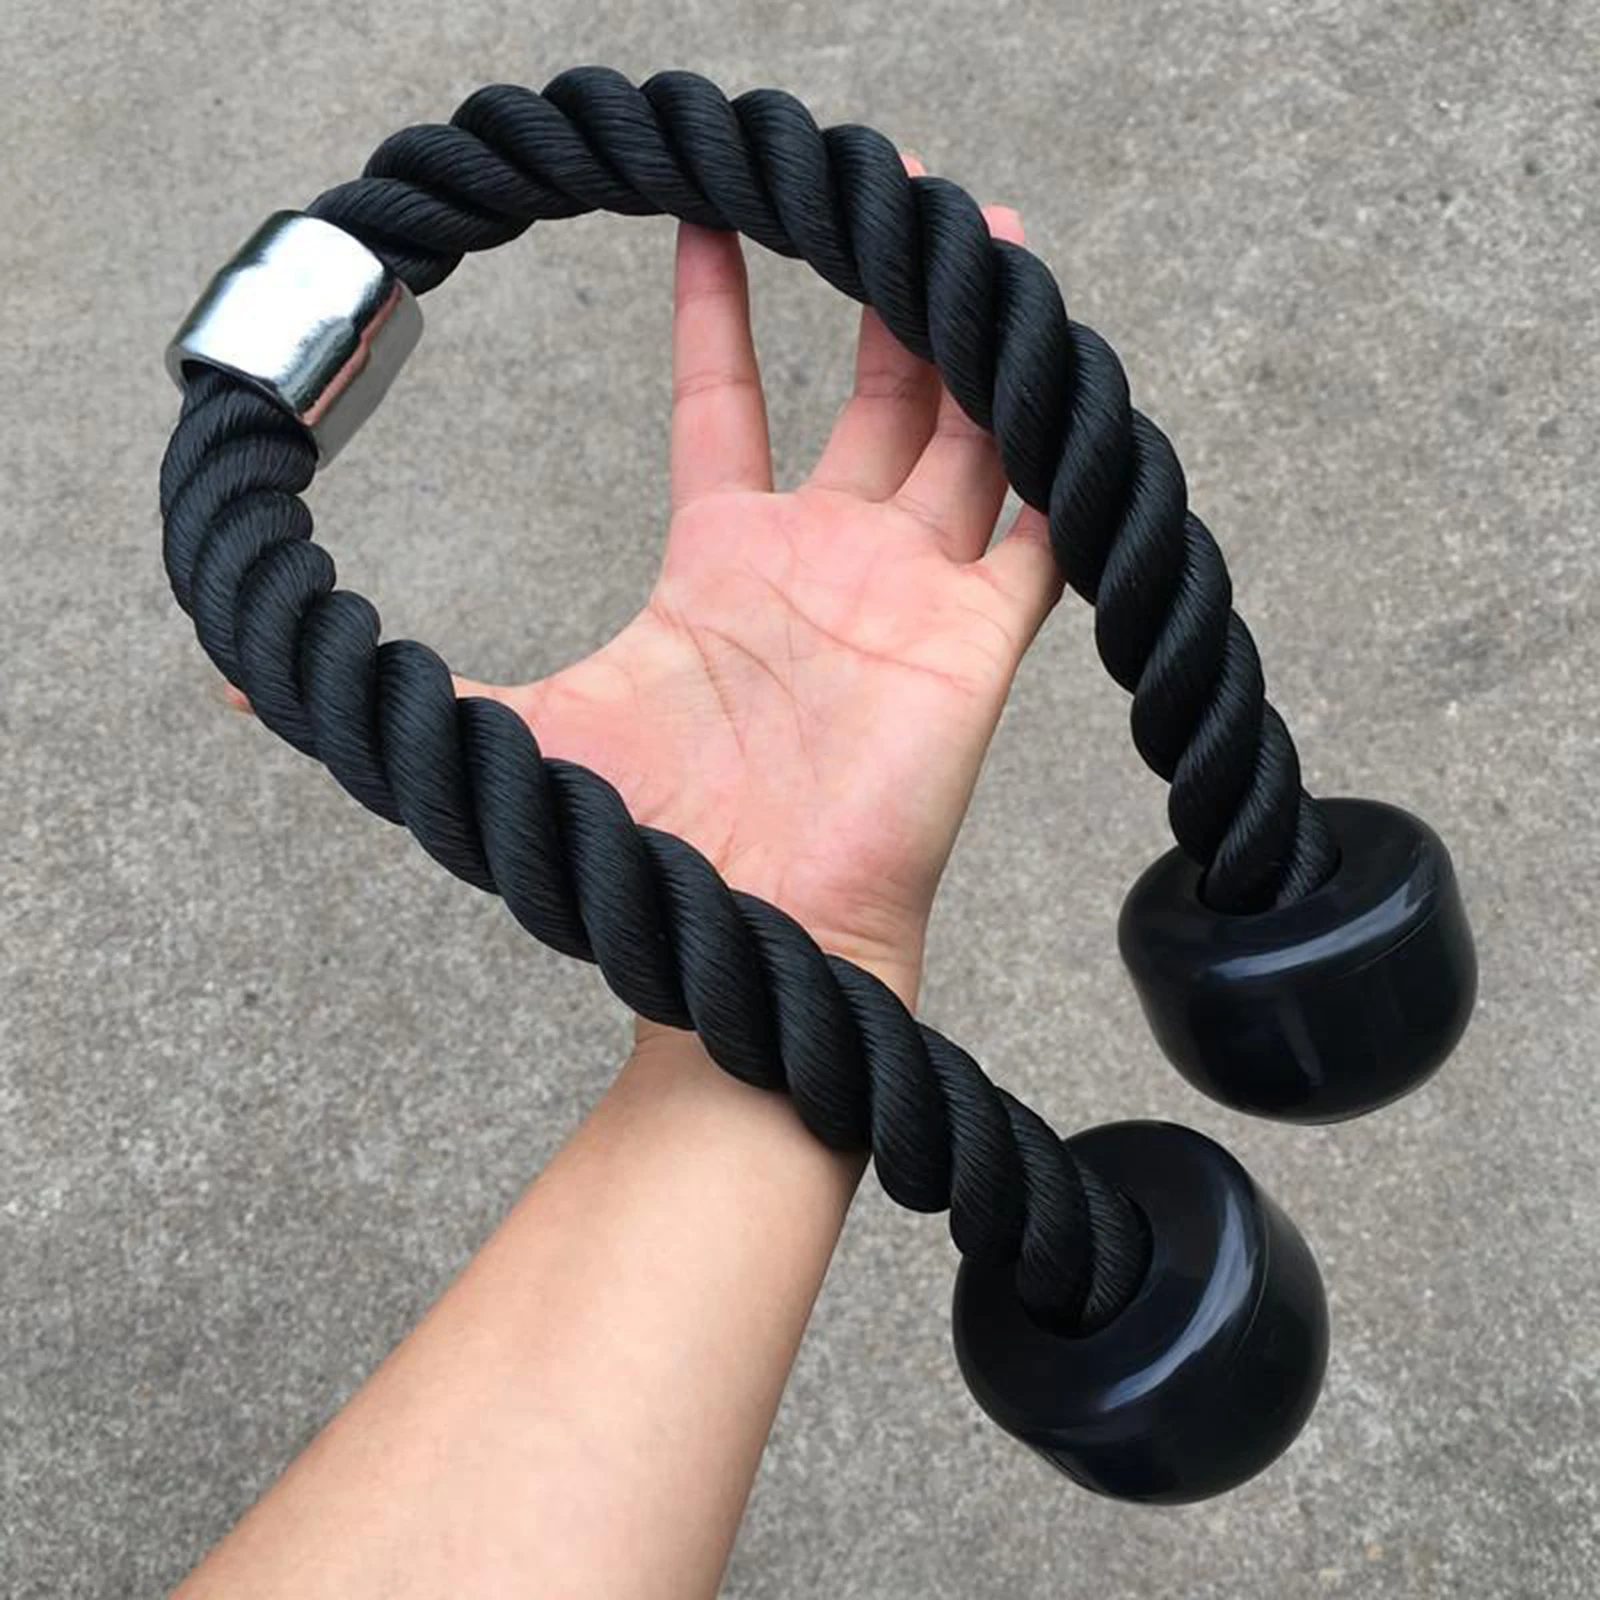 70cm Solid Fitness Triceps Rope Multi Gym Cable Attachment Press Push Pull Down Arm Exercise Equipment Attachment